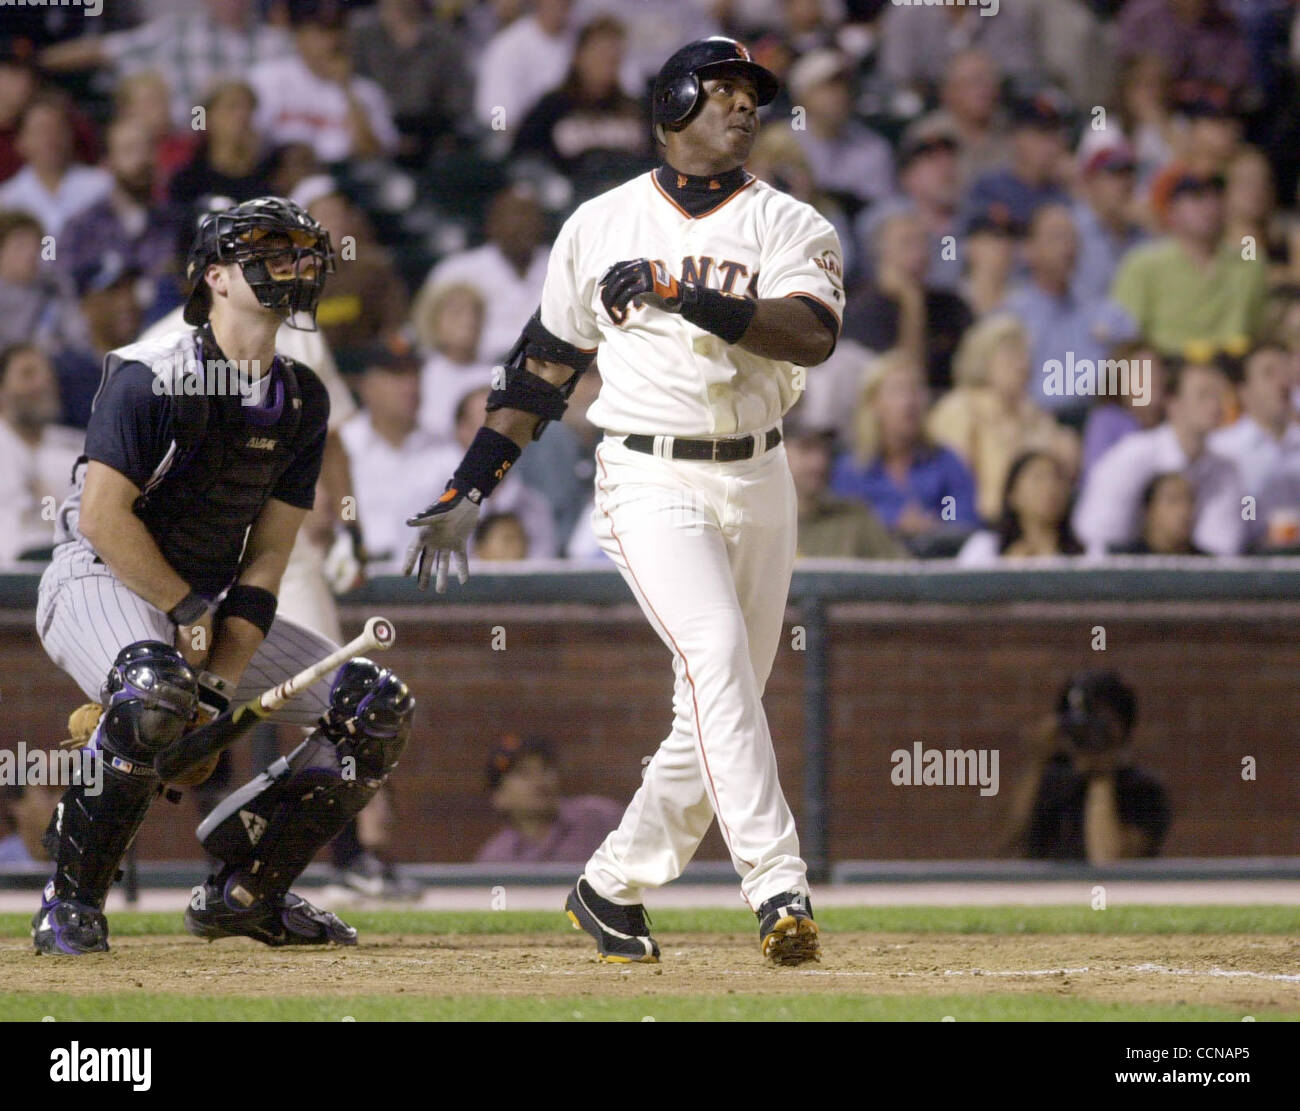 San Francisco Giants Barry Bonds makes it 697 as he watches the flight of a two run home run ball bringing home Deivi Cruz in the second inning against the Arizona Diamondbacks at SBC Park, Friday, September 3, 2004, in San Francisco, Calif. Diamondback catcher Chris Snyder also watches. (Contra Cos Stock Photo